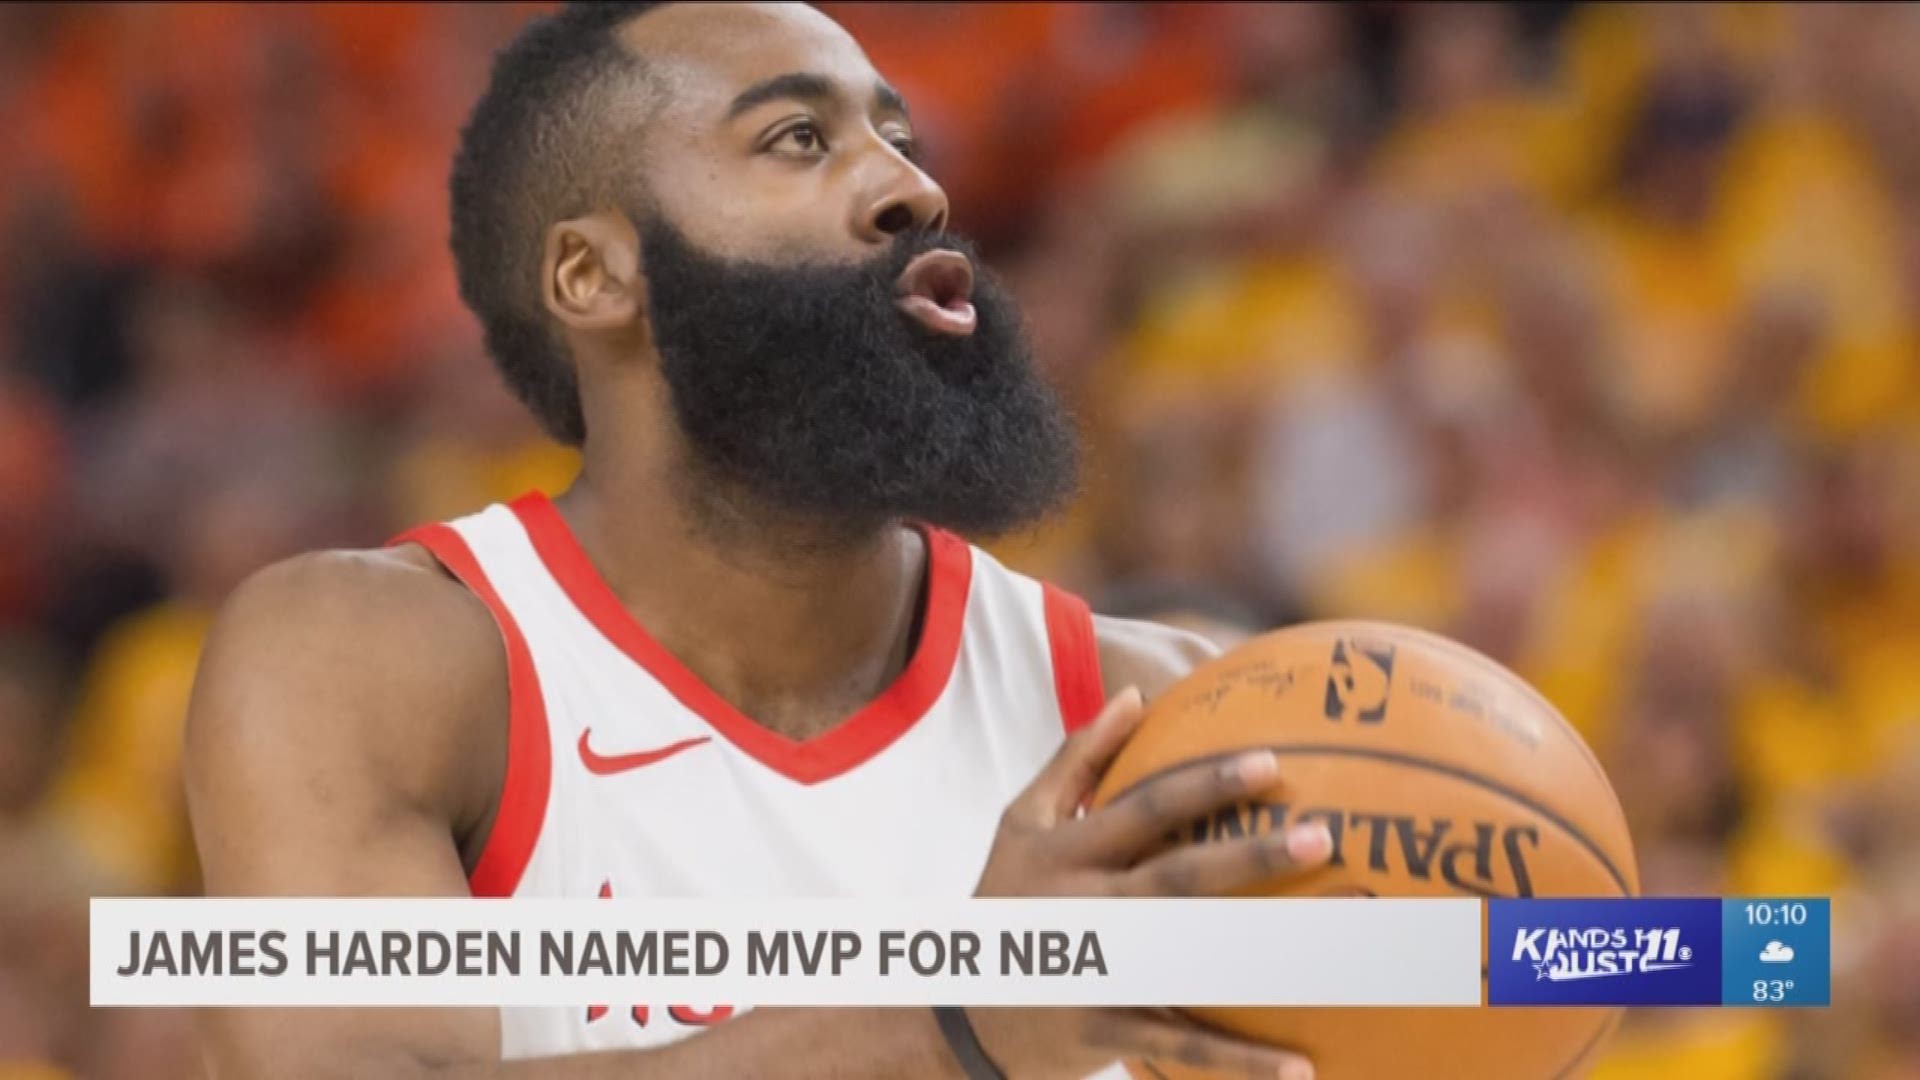 KHOU 11 Top Headlines at 10 p.m. include irate passenger screams to be left off plane after flight makes emergency landing, first board meeting since Santa Fe shooting and James Harden named MVP for NBA.